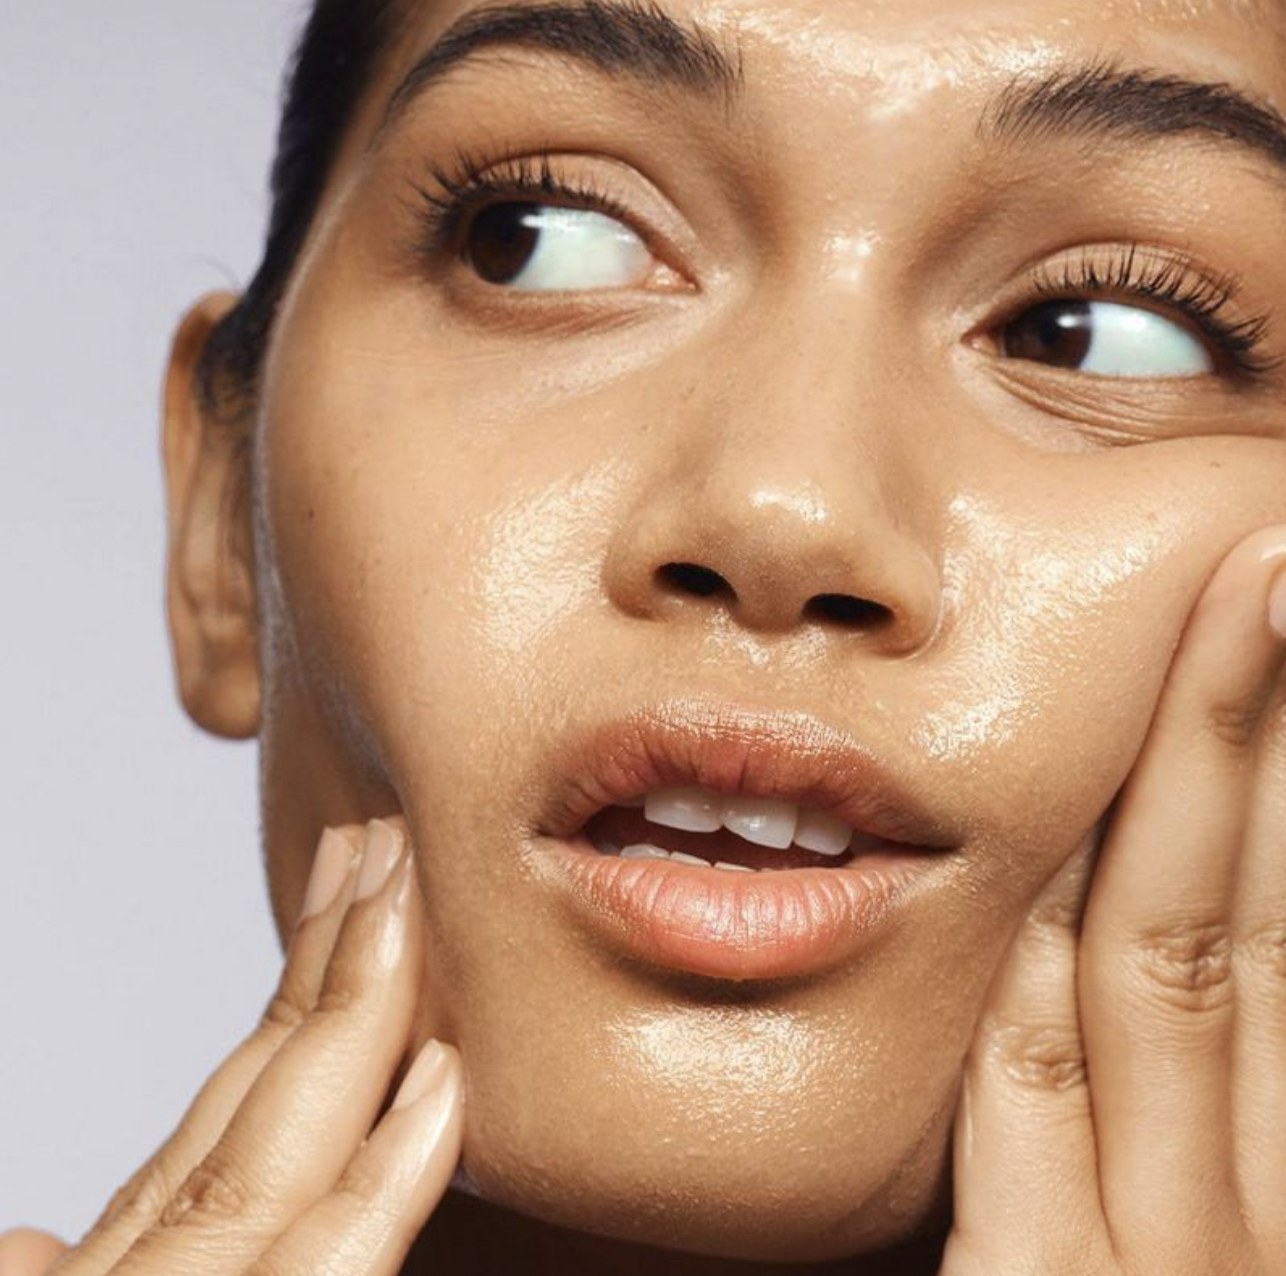 A person using cleansing balm on their face